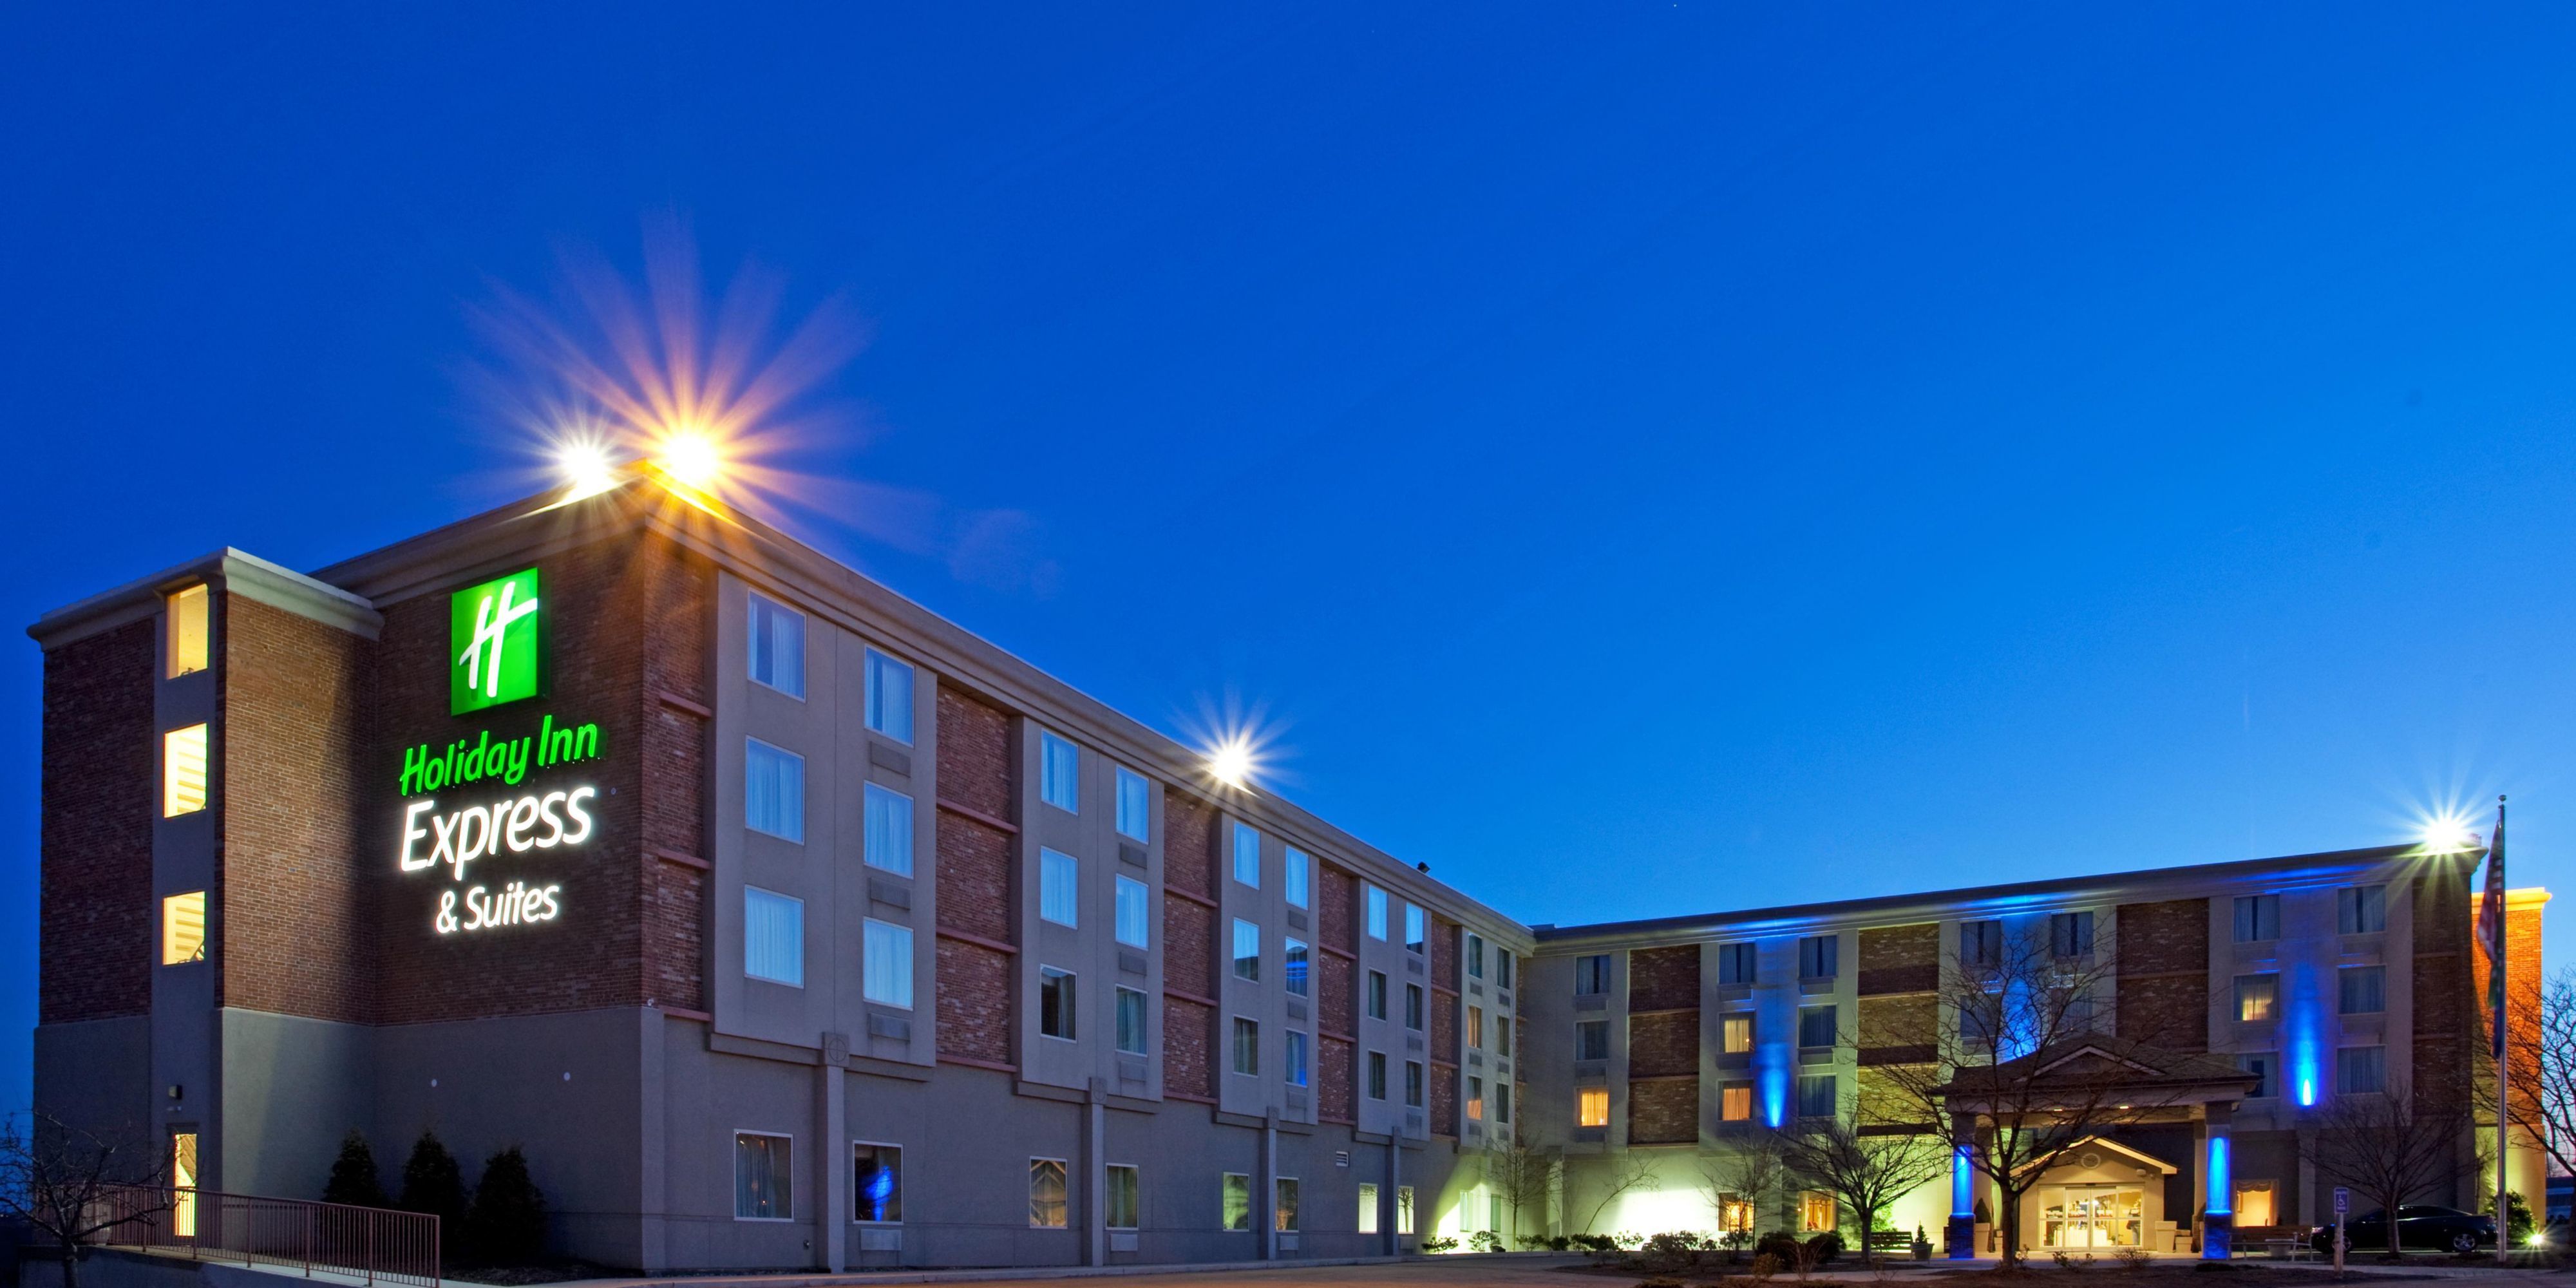 Photo of Holiday Inn Express & Suites Pittsburgh West Mifflin, West Mifflin, PA